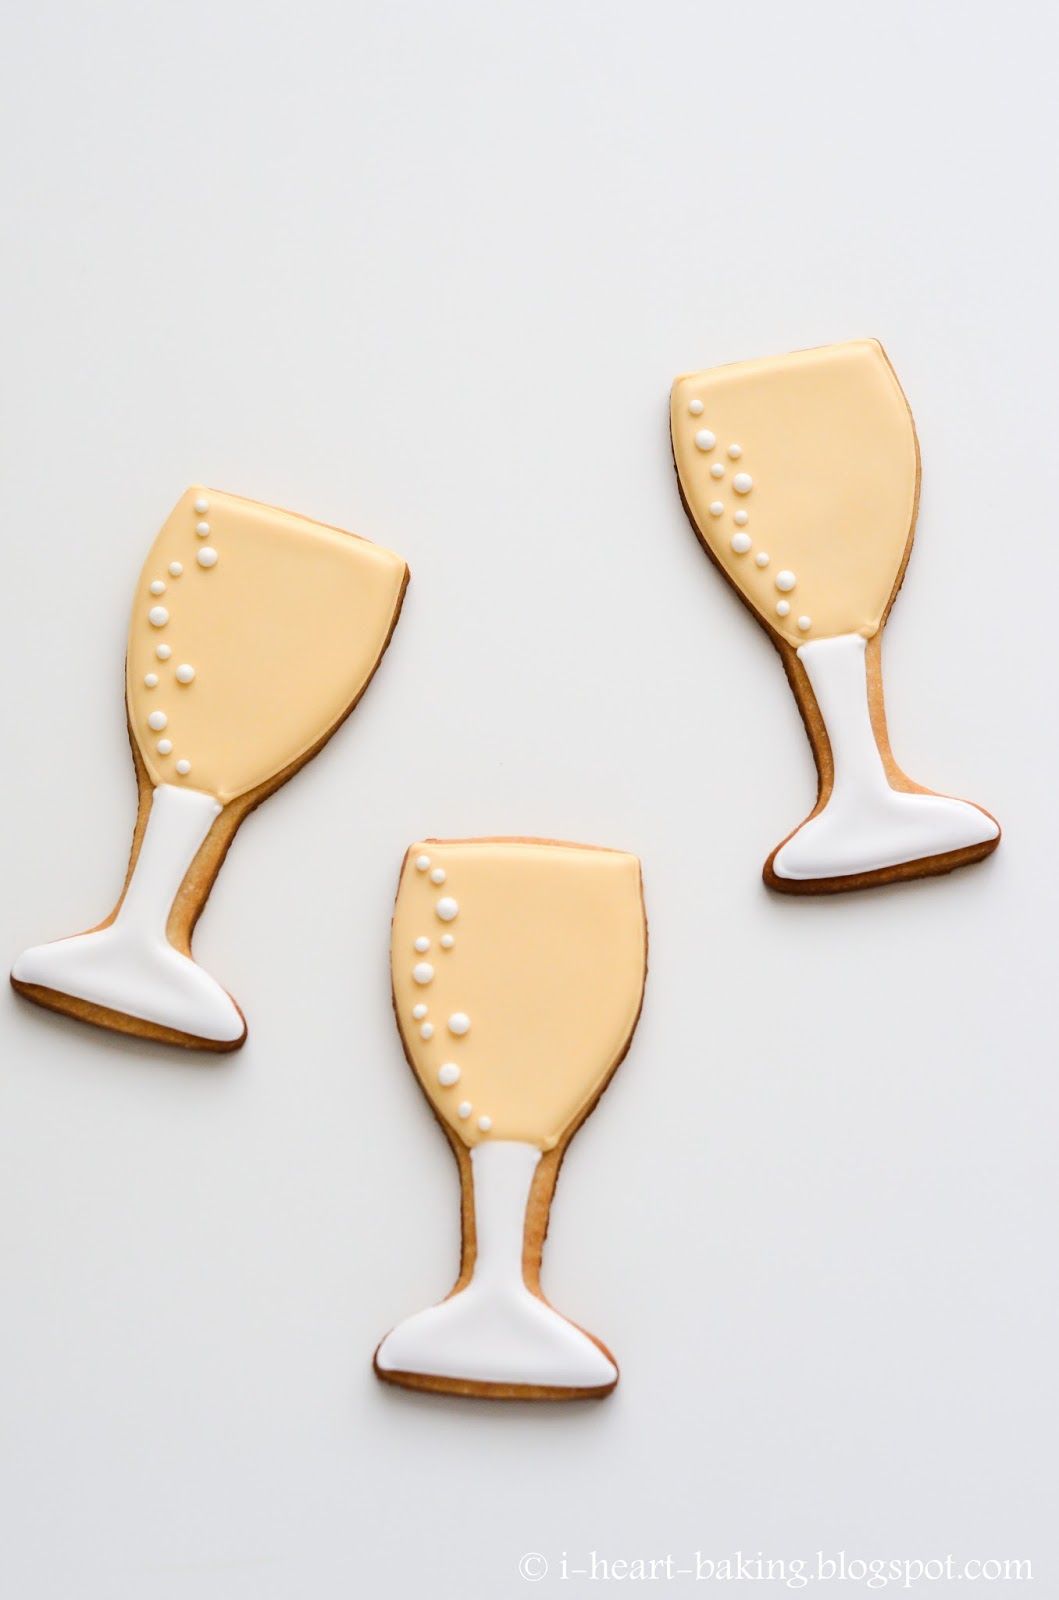 CHAMPAGNE/WINE GLASS COOKIE CUTTER